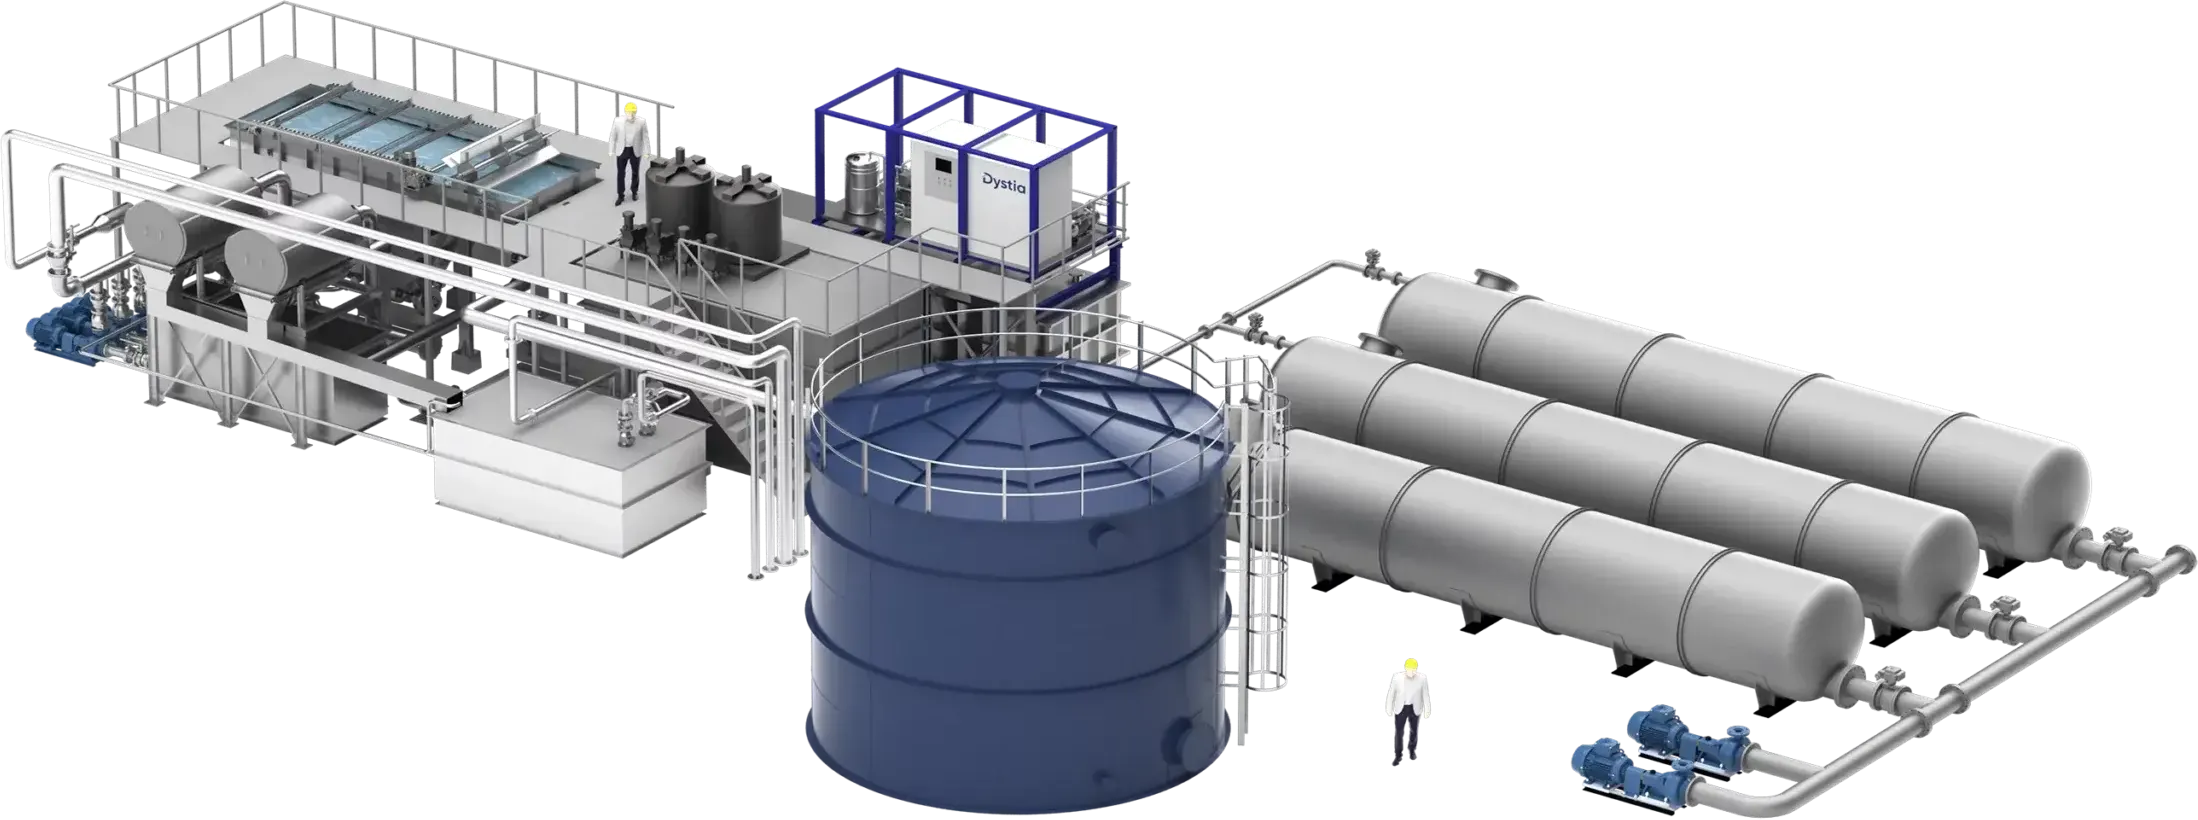 Waterwaste system for fodd processing companies